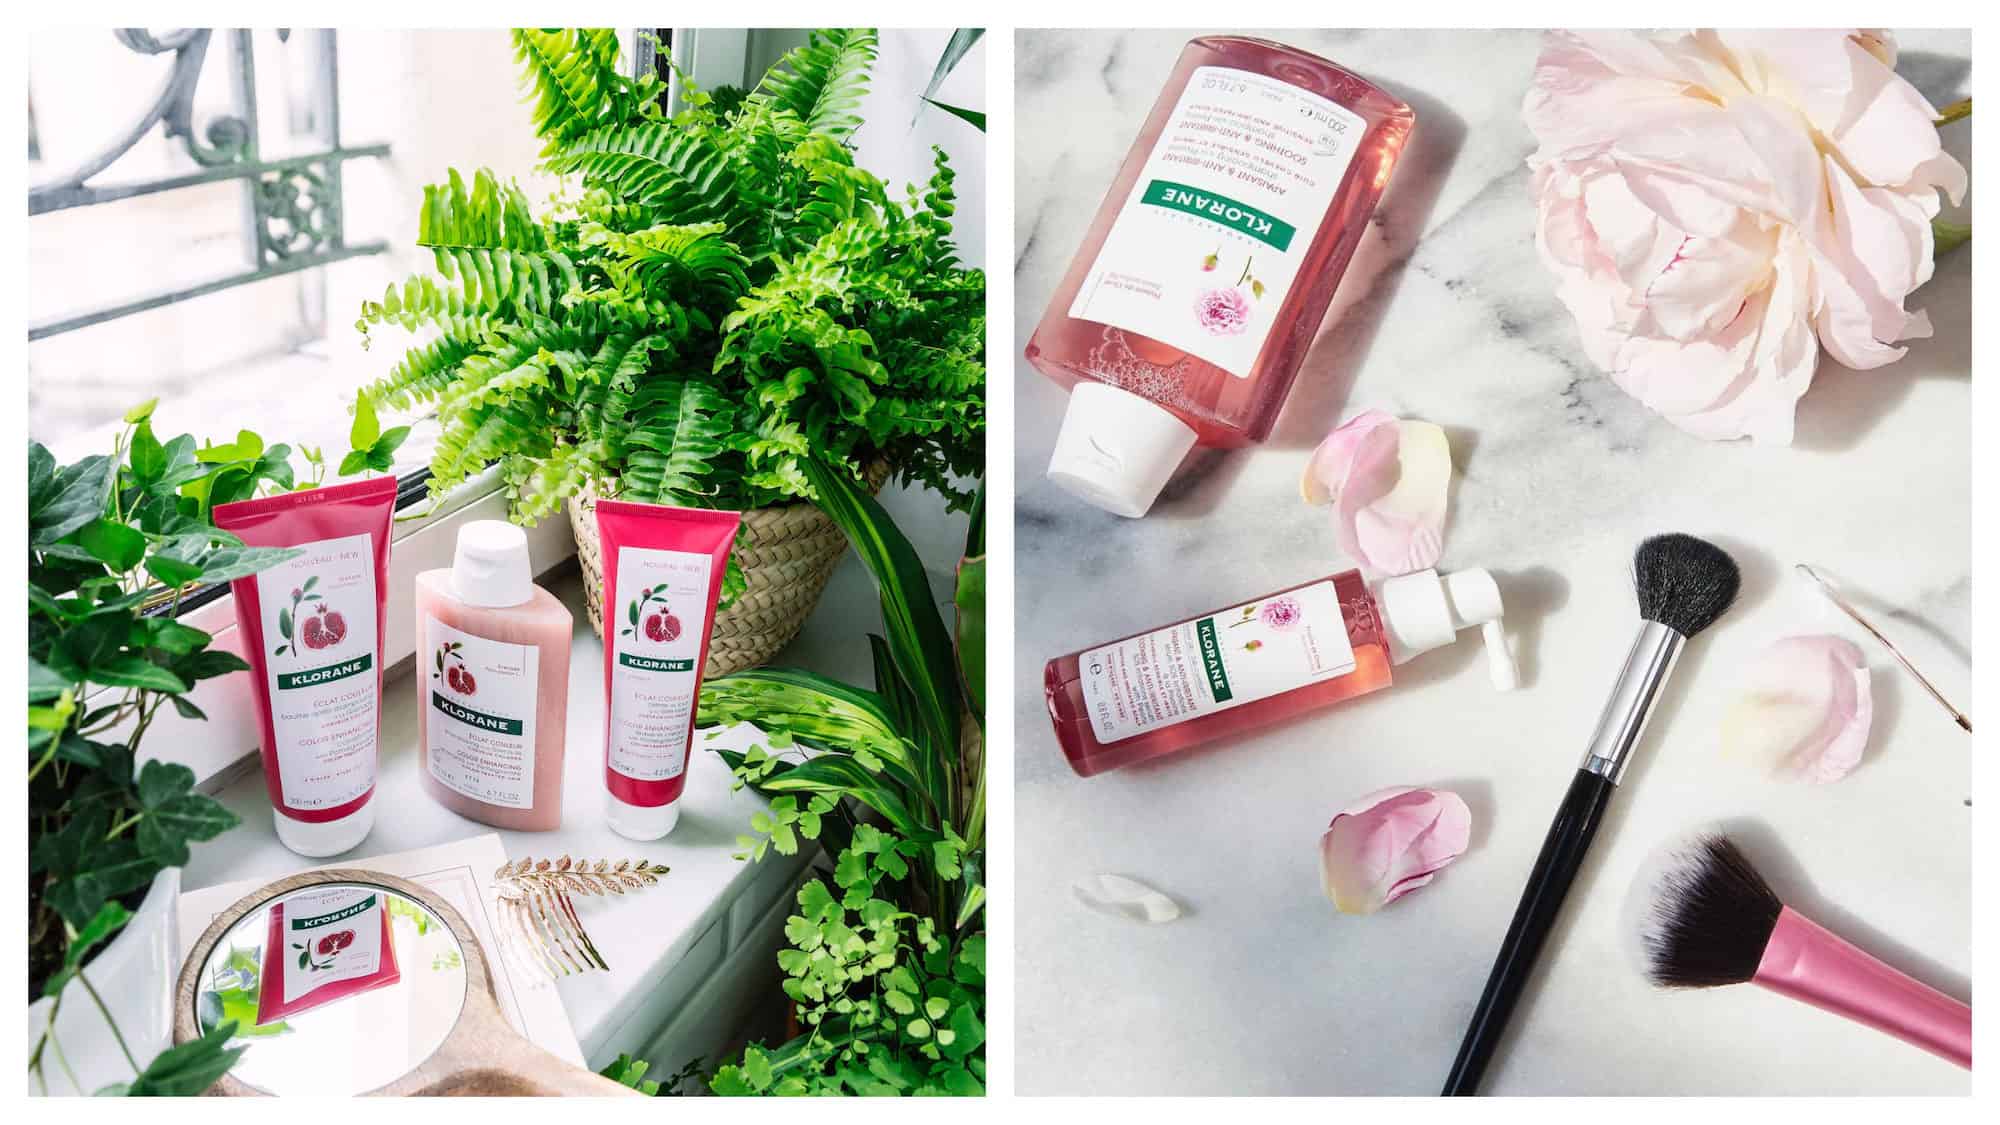 Buy French beauty products for less in Paris, like these Klorane hair care products set up next to leafy green plants on a windowsill (left). And these Klorane lotions and potions arranged on a marble top next to makeup brushes and rose petals (right).